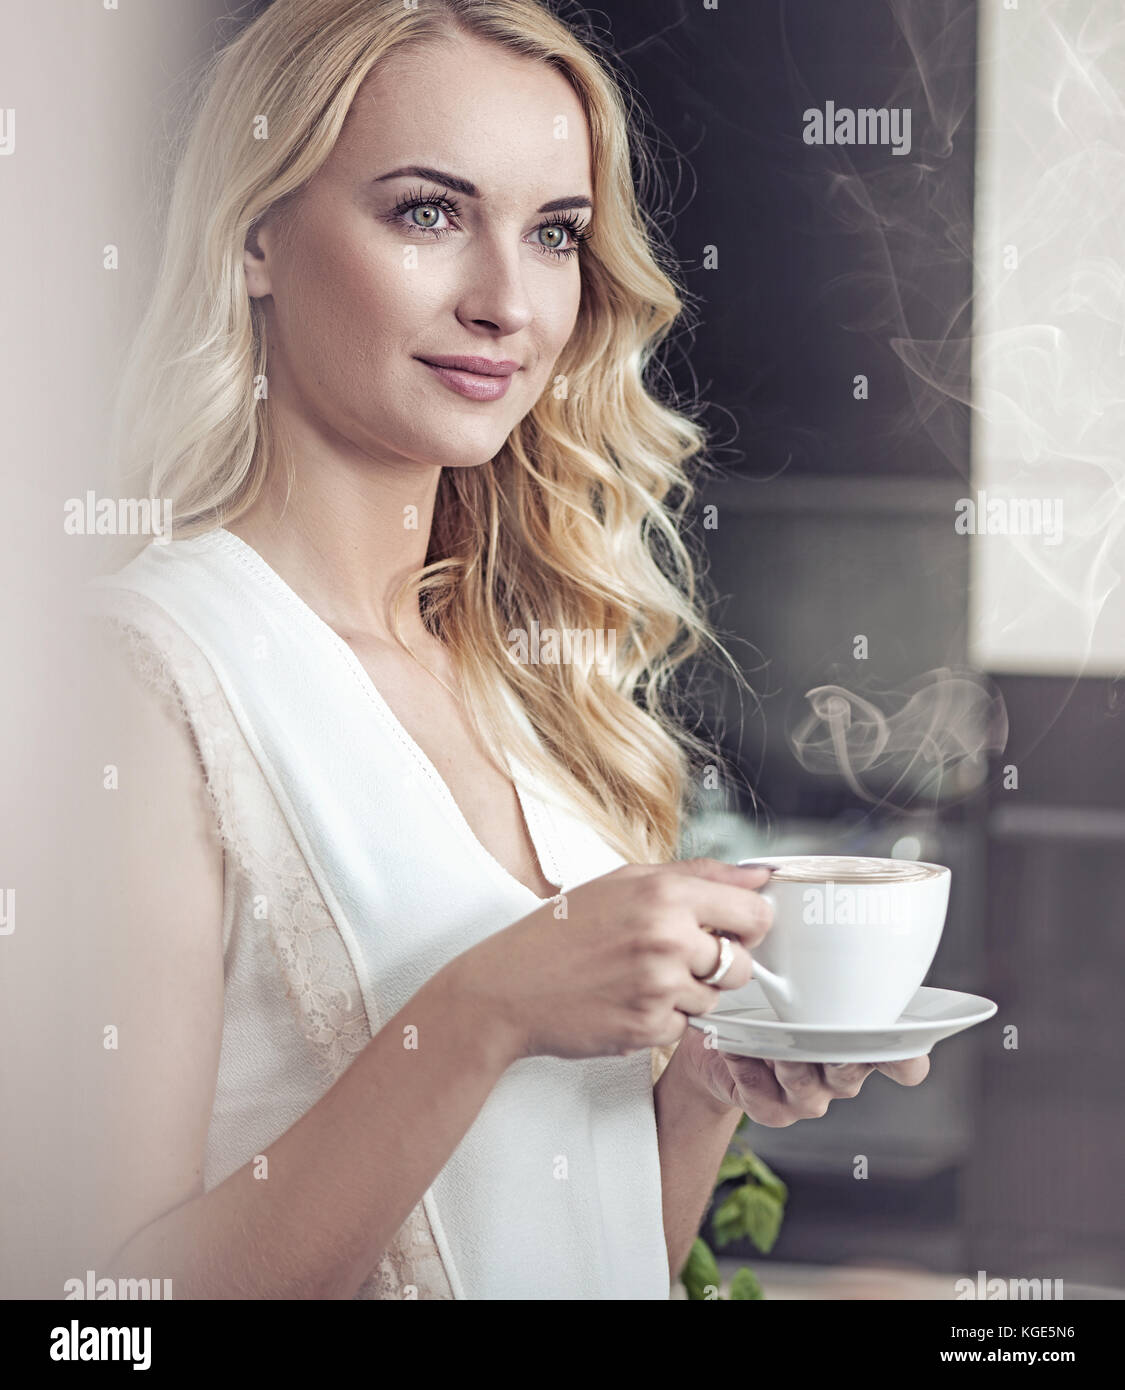 Portrait of a pretty blond lady drinking a cup of coffee Stock Photo